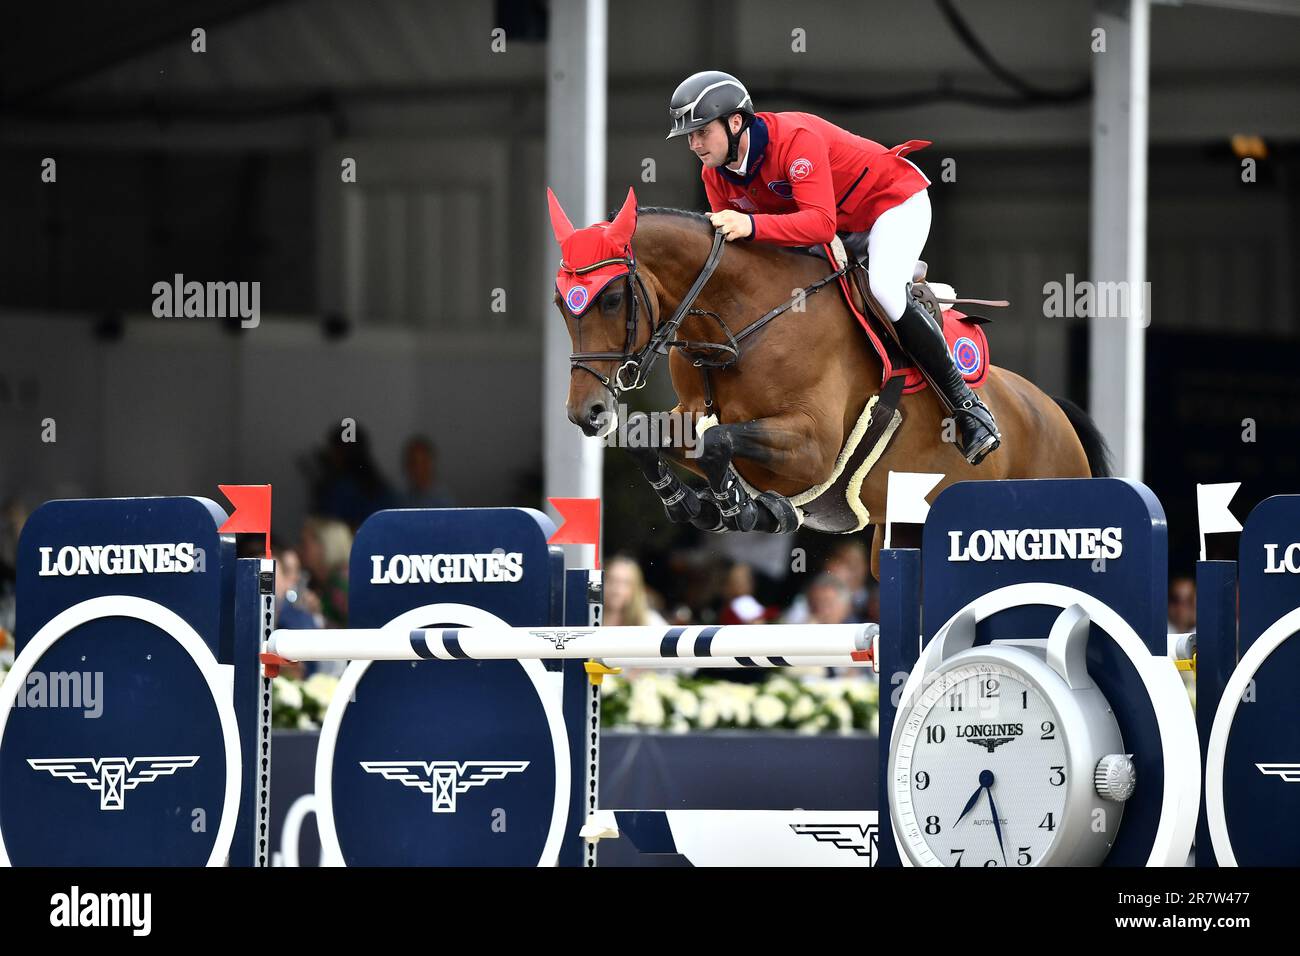 STOCKHOLM 20230617 Jeremy Sweetnam, Ireland, with the horse Aglaia J during the team show jumping competition at the Longines Global Champions Tour in Stock Photo